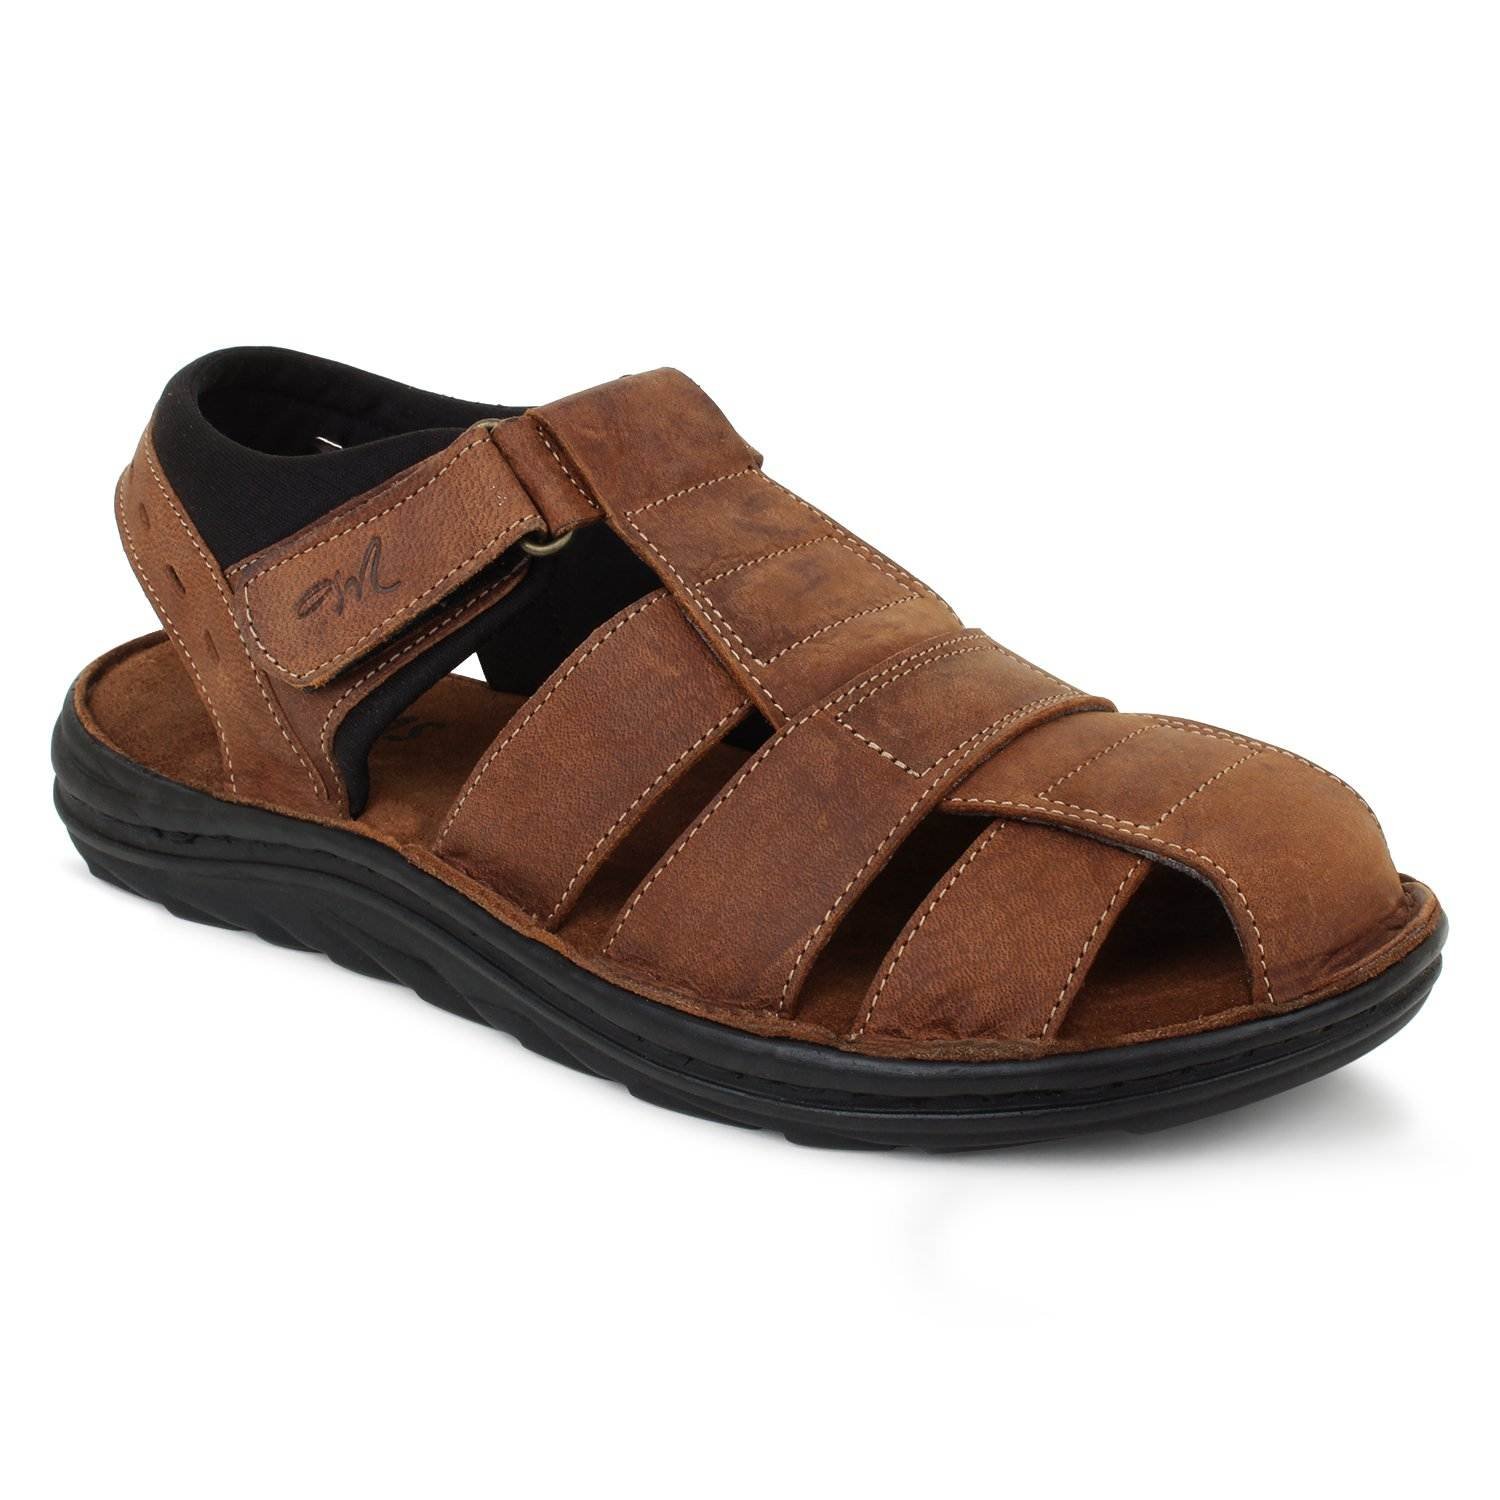 Brown Suede Leather Closed Toe Sandals For Men Mardi Gras